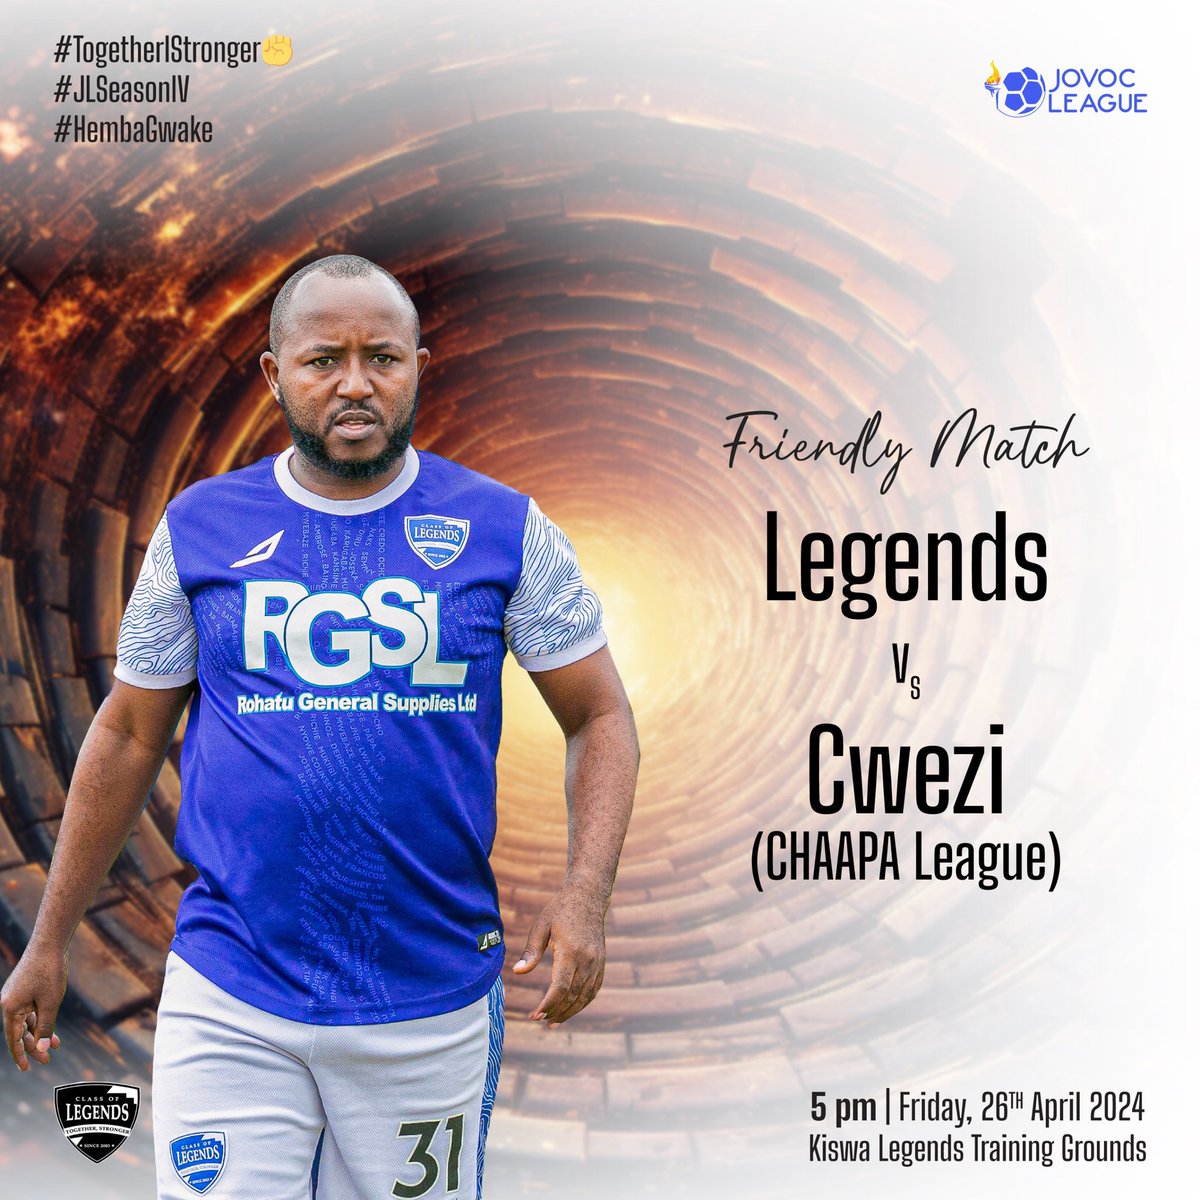 Friendly Match Alert! 🆚 Chwezi FC (@ChaapaLeague) 🗓️ Tomorrow, Friday 26th,April 🕔 5:30pm 🏟️ Kiswa Legends' Grounds. Come cheer your favorite team! See you there! ⚽ #TogetherStronger #ChaapLeague